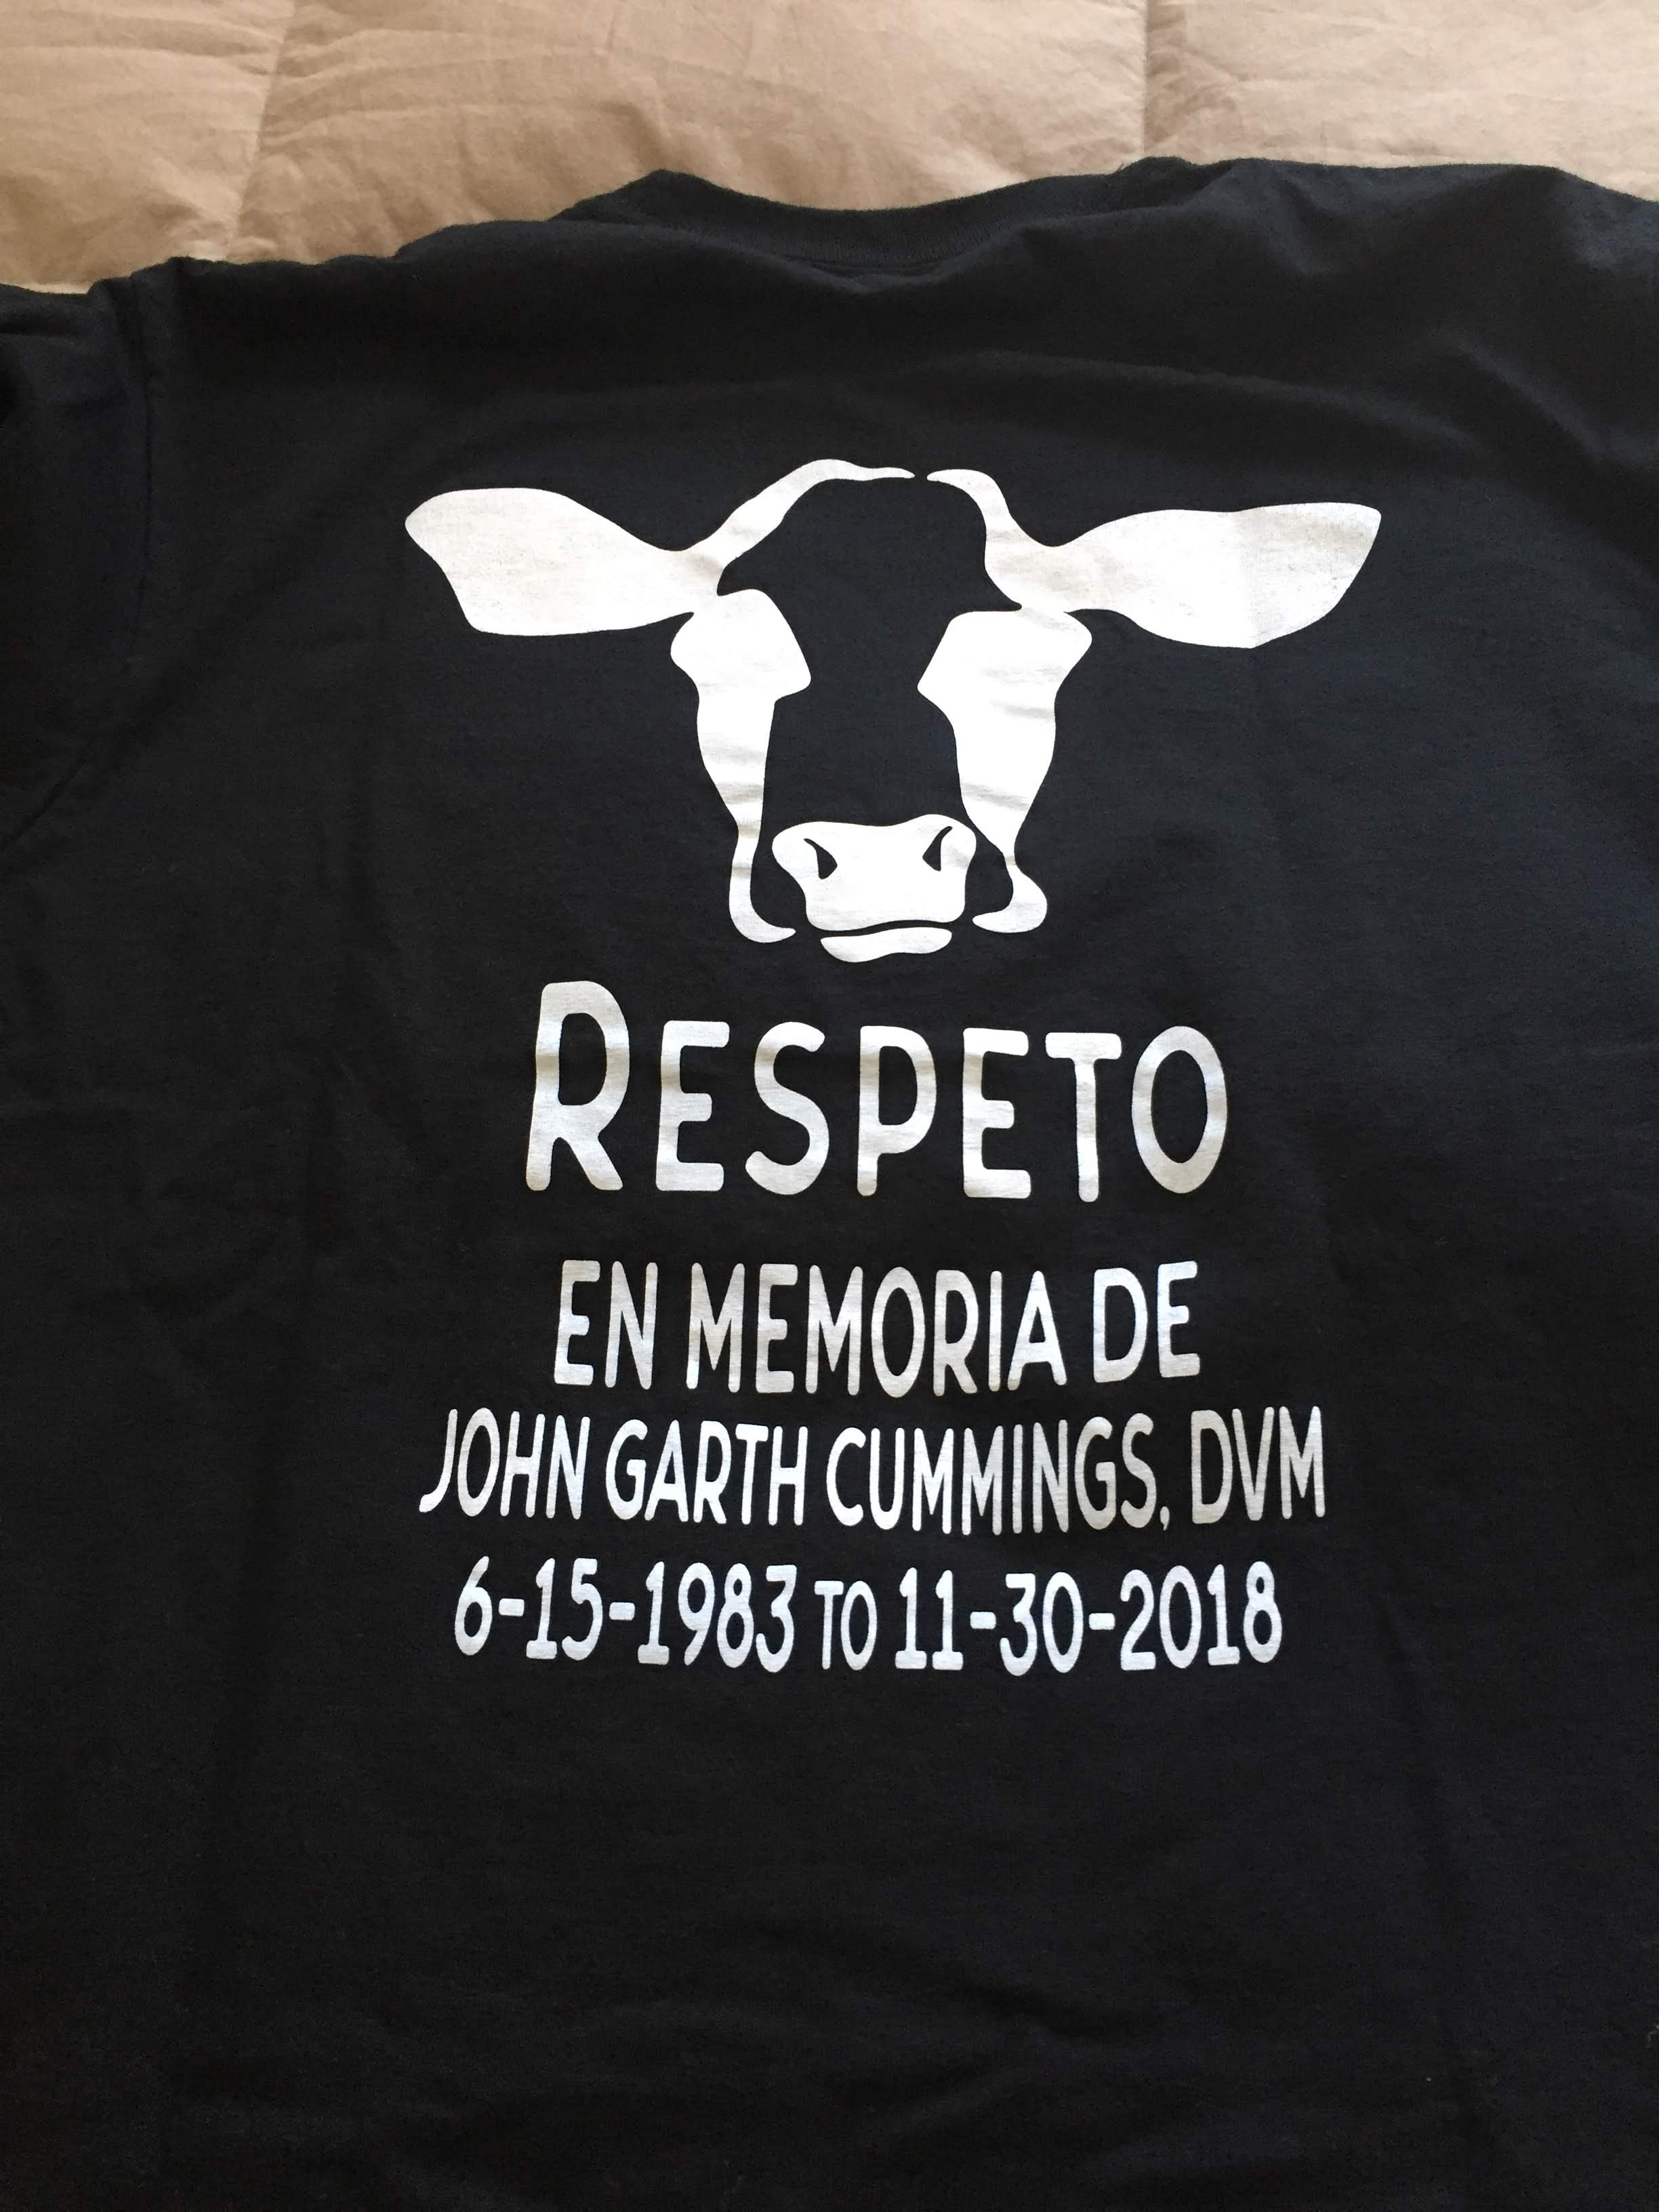 Picture of a shirt with Spanish words memorializing Garth Cummings